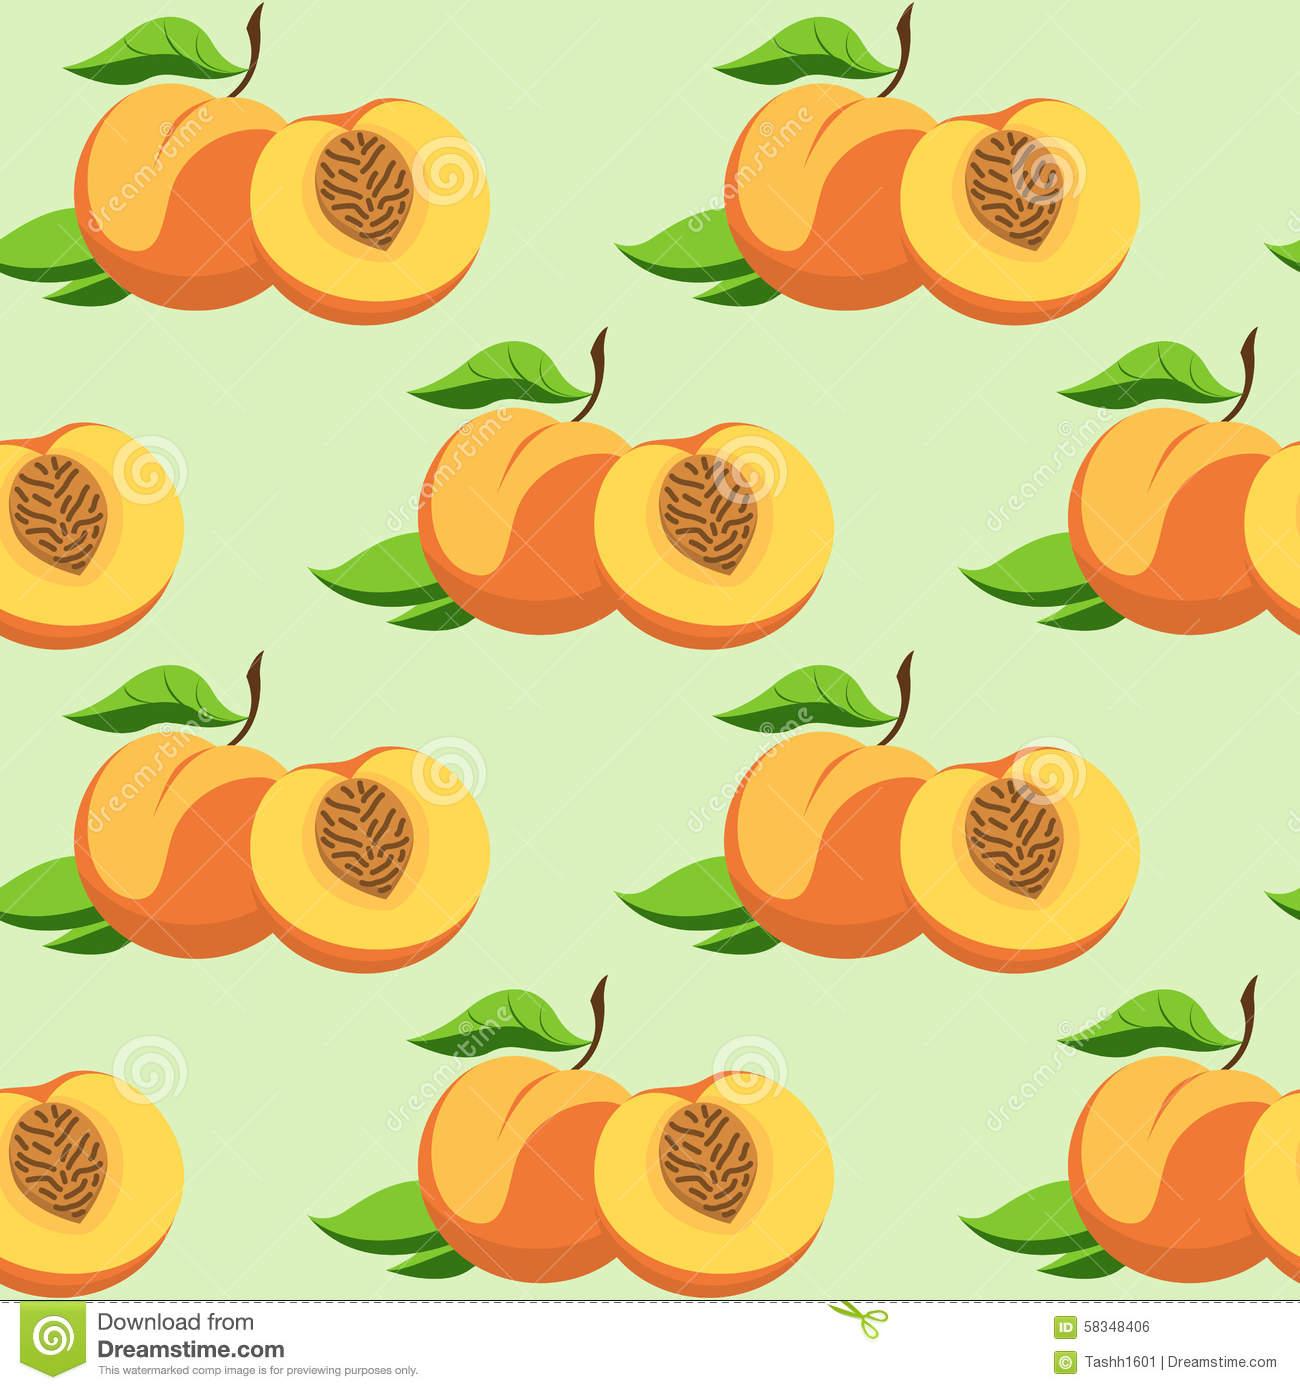 Leaves of peach clipart - Clipground